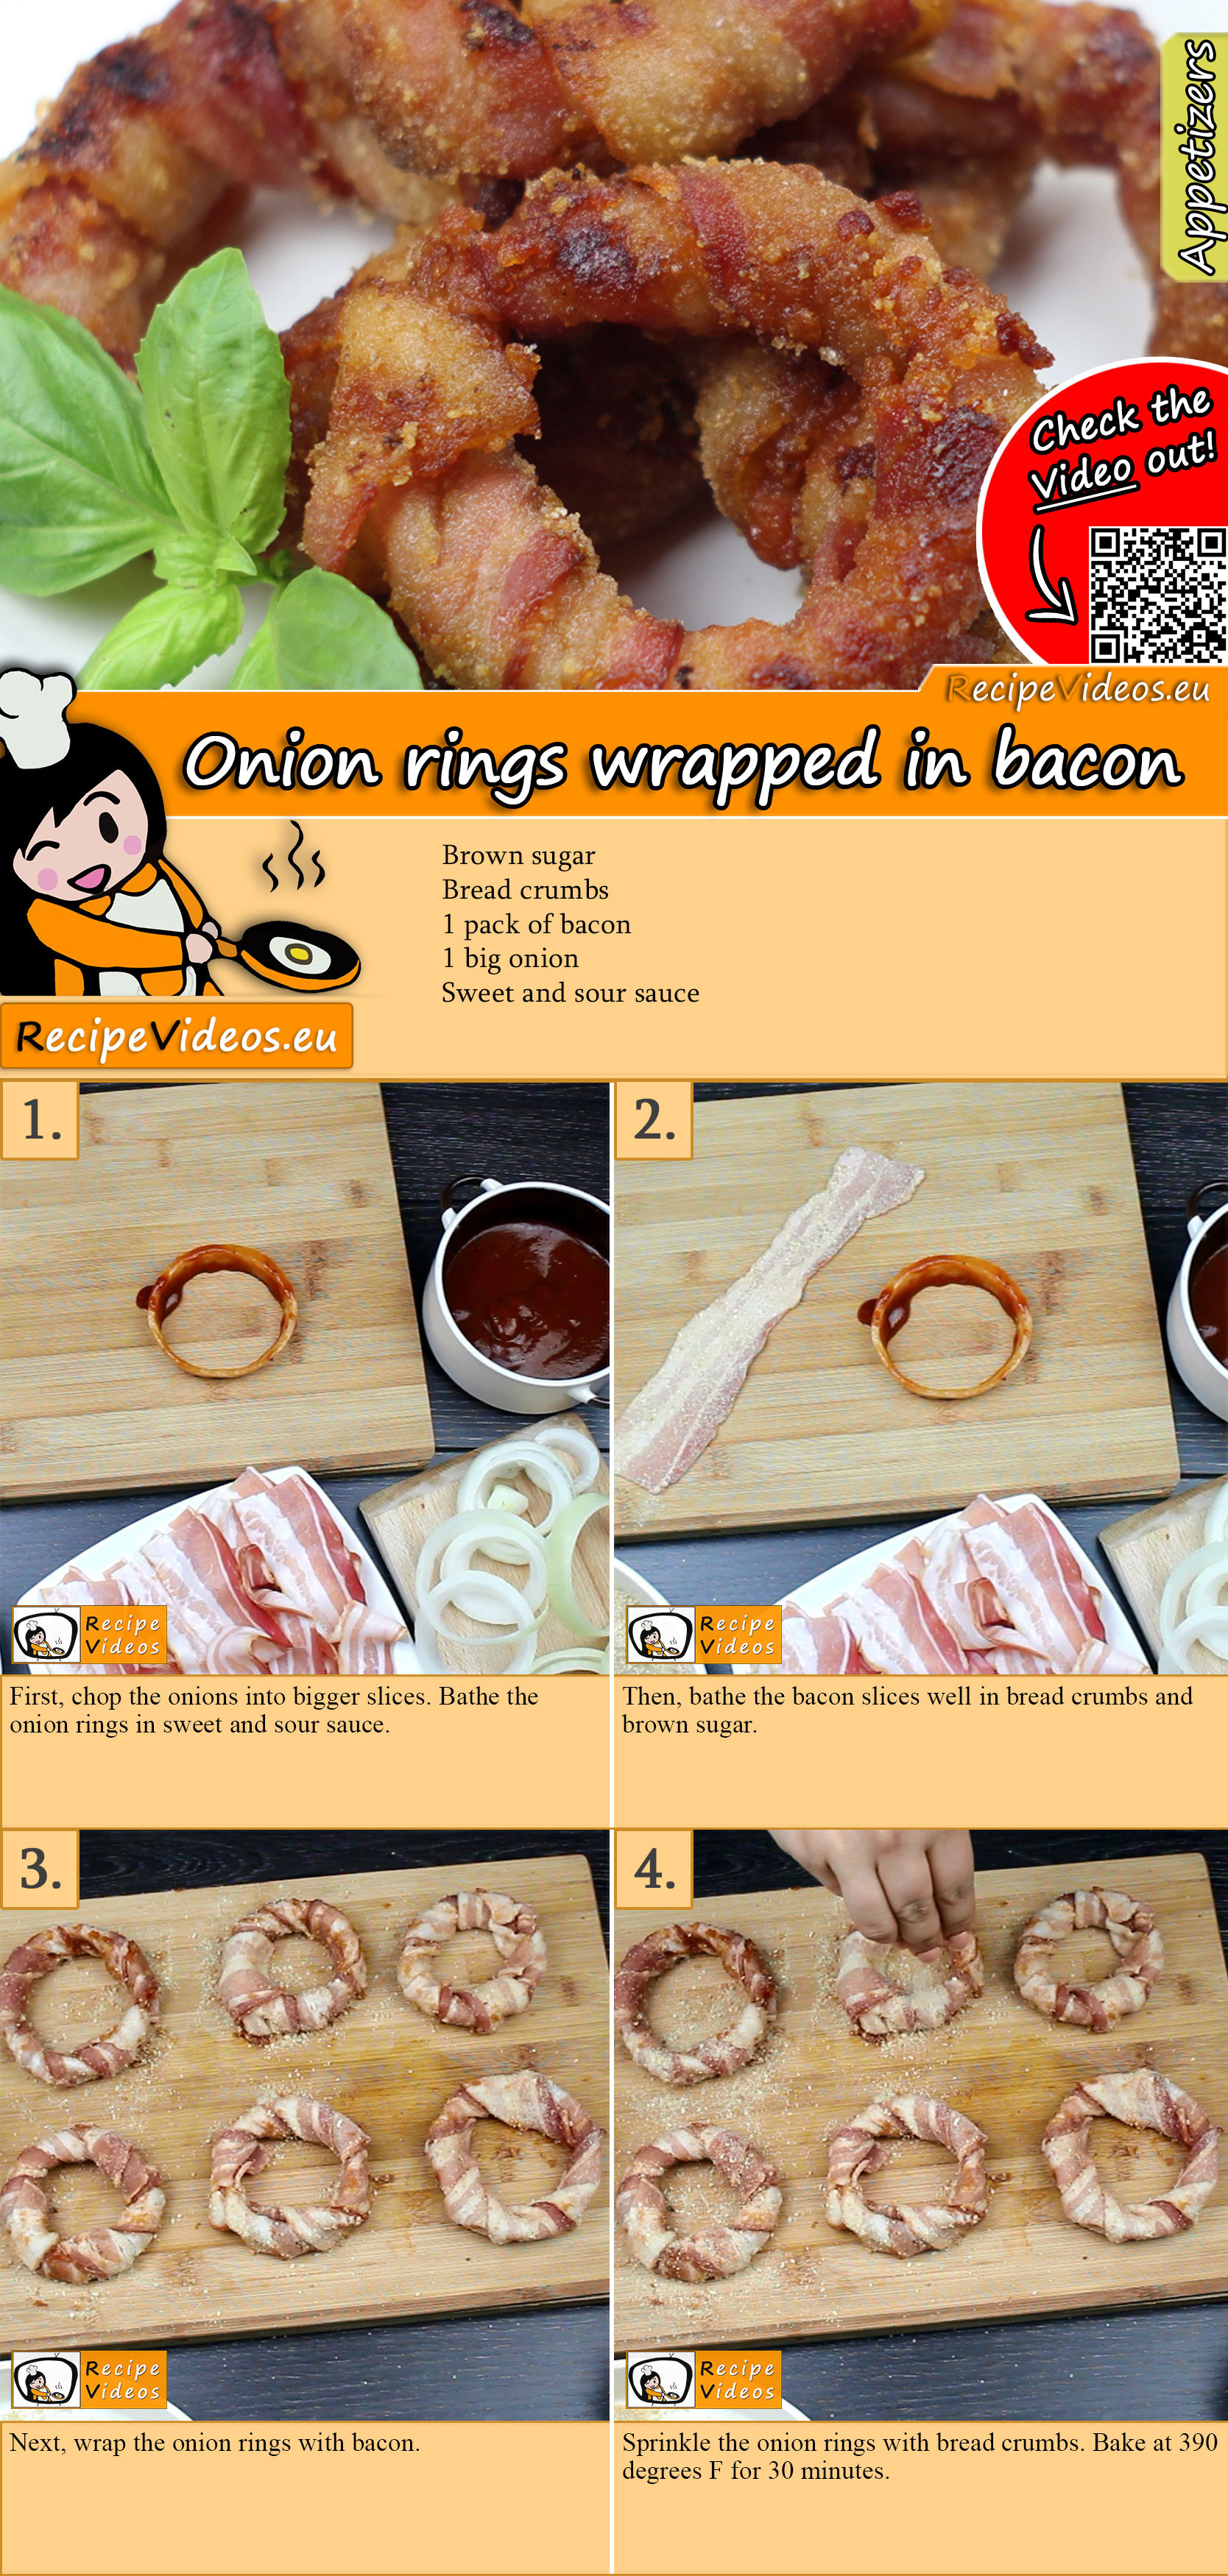 Onion rings wrapped in bacon recipe with video